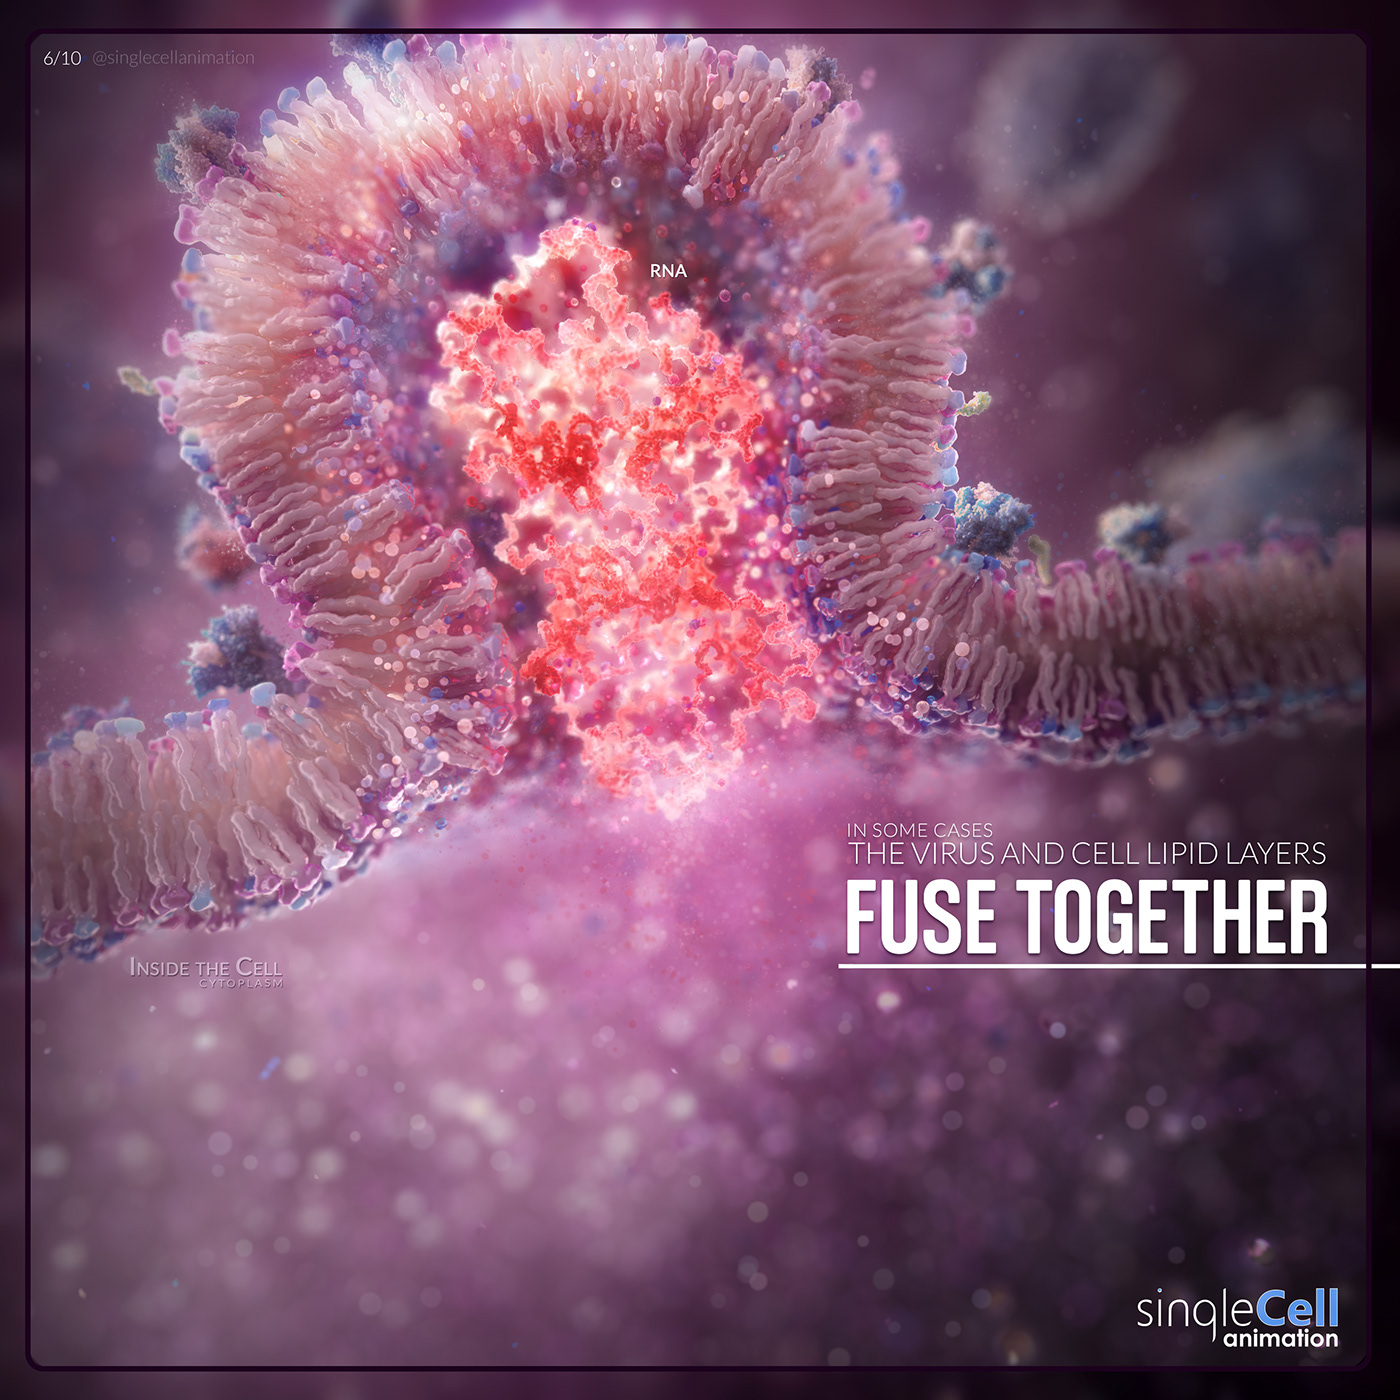 human cells undergo a structural change allowing the viral membrane to fuse with the cell membrane